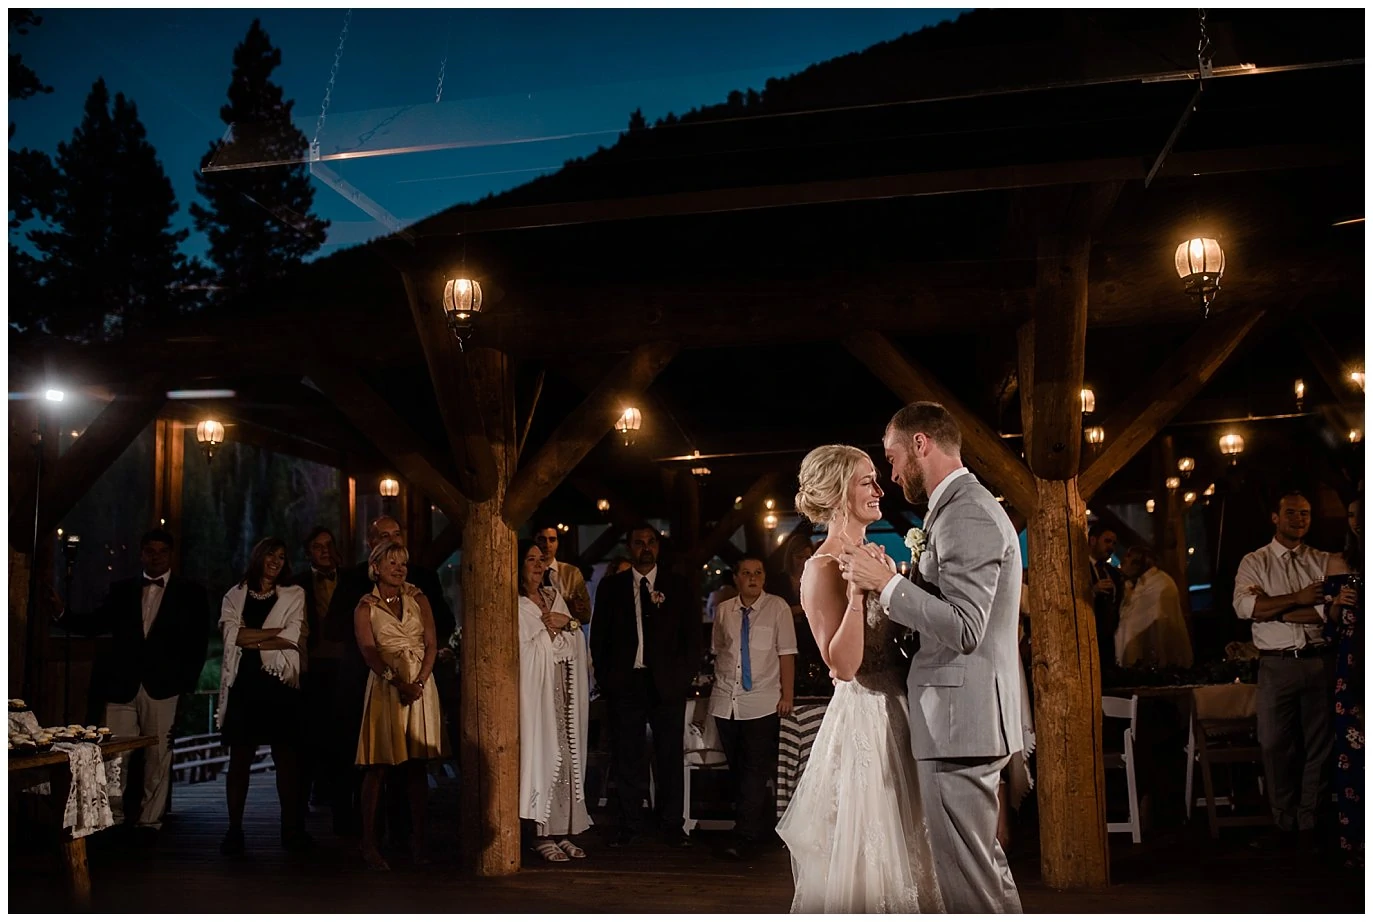 bride and groom first dance aat Piney River Ranch wedding by Aspen wedding photographer Jennie Crate, Photographer